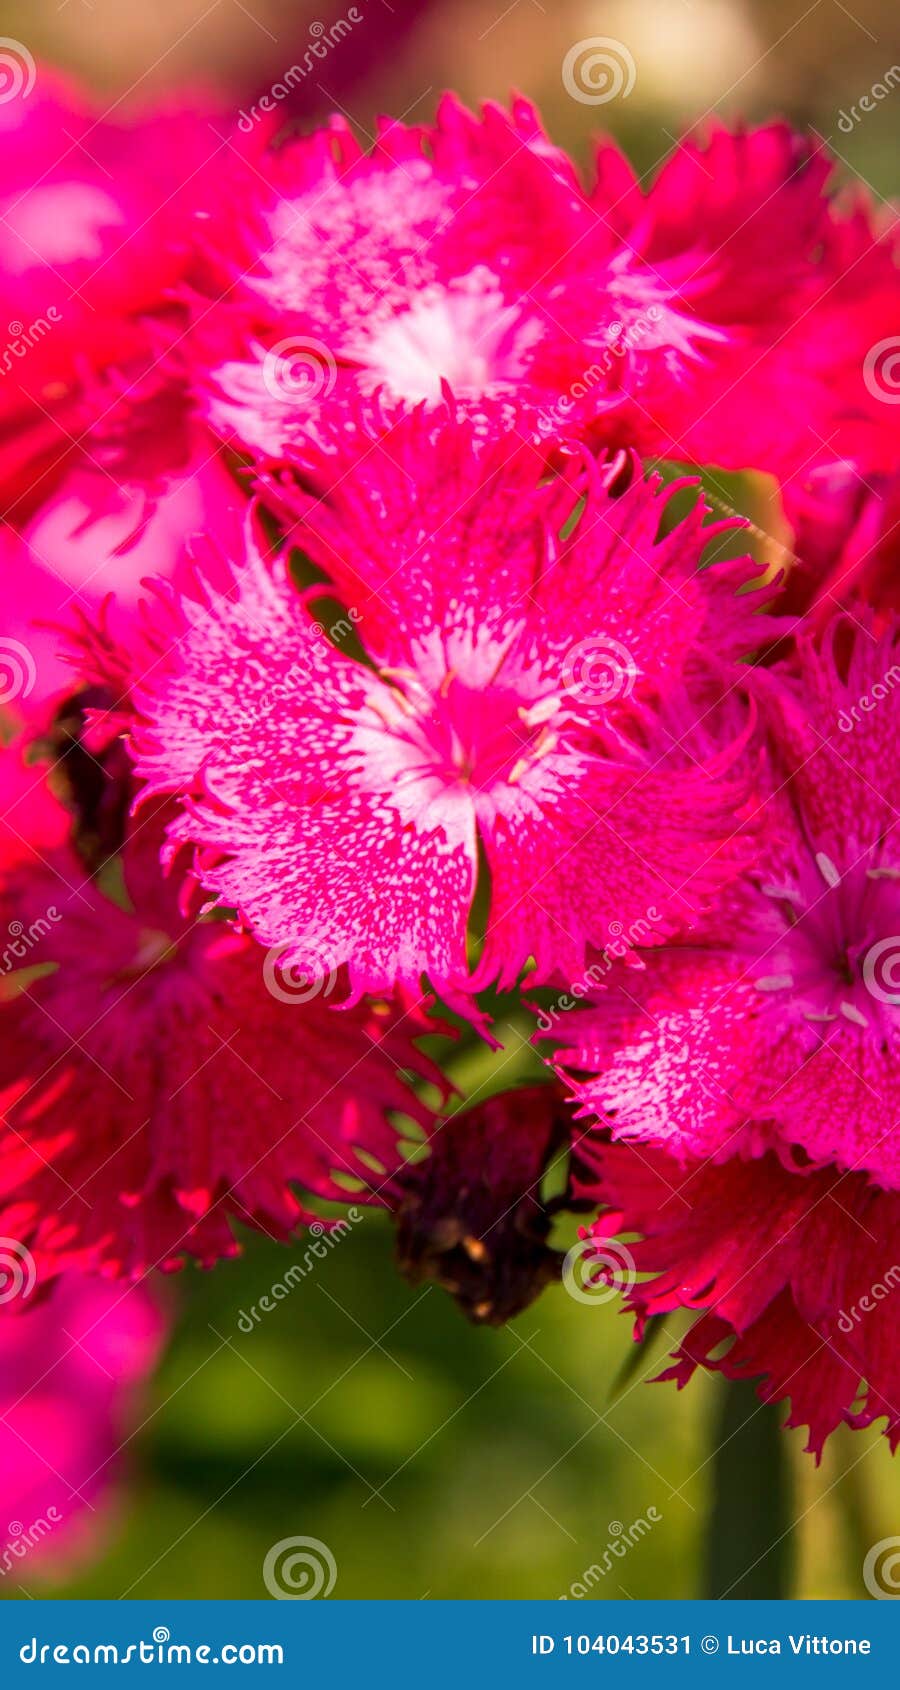 Pink and white flowers stock image. Image of eating - 104043531